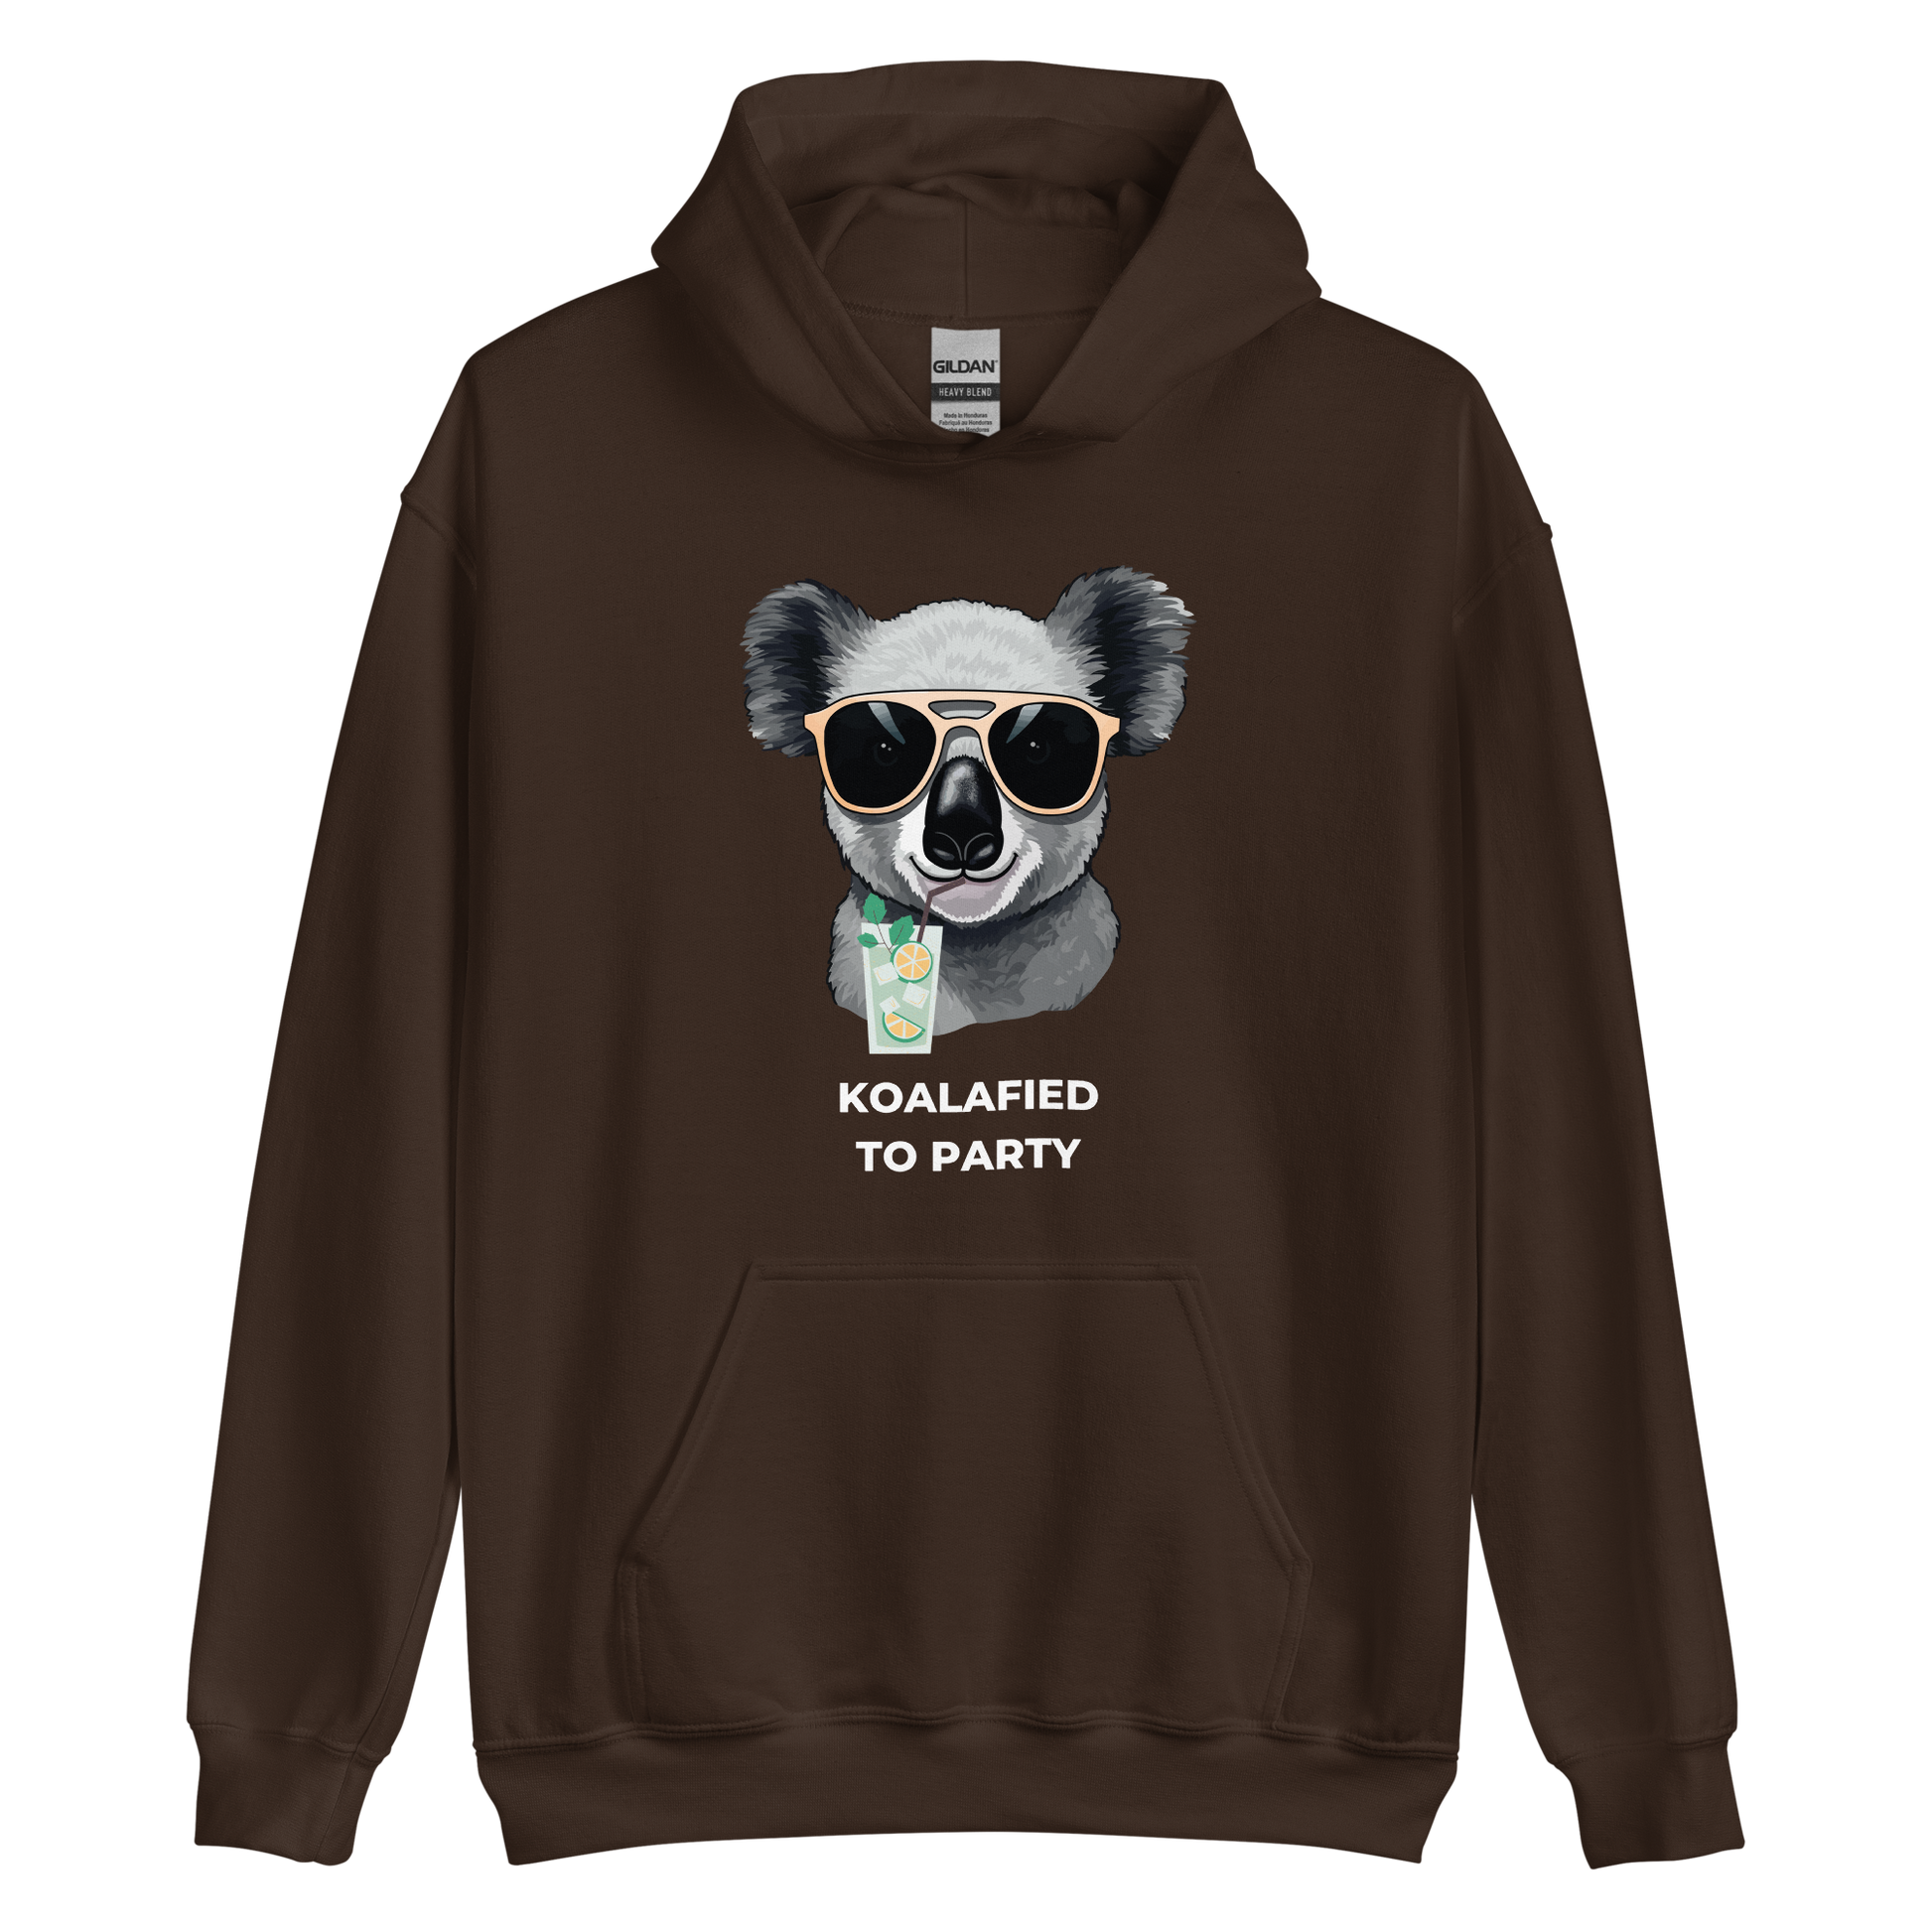 Dark Chocolate Koala Hoodie featuring a captivating Koalafied To Party graphic on the chest - Funny Graphic Koala Hoodies - Boozy Fox